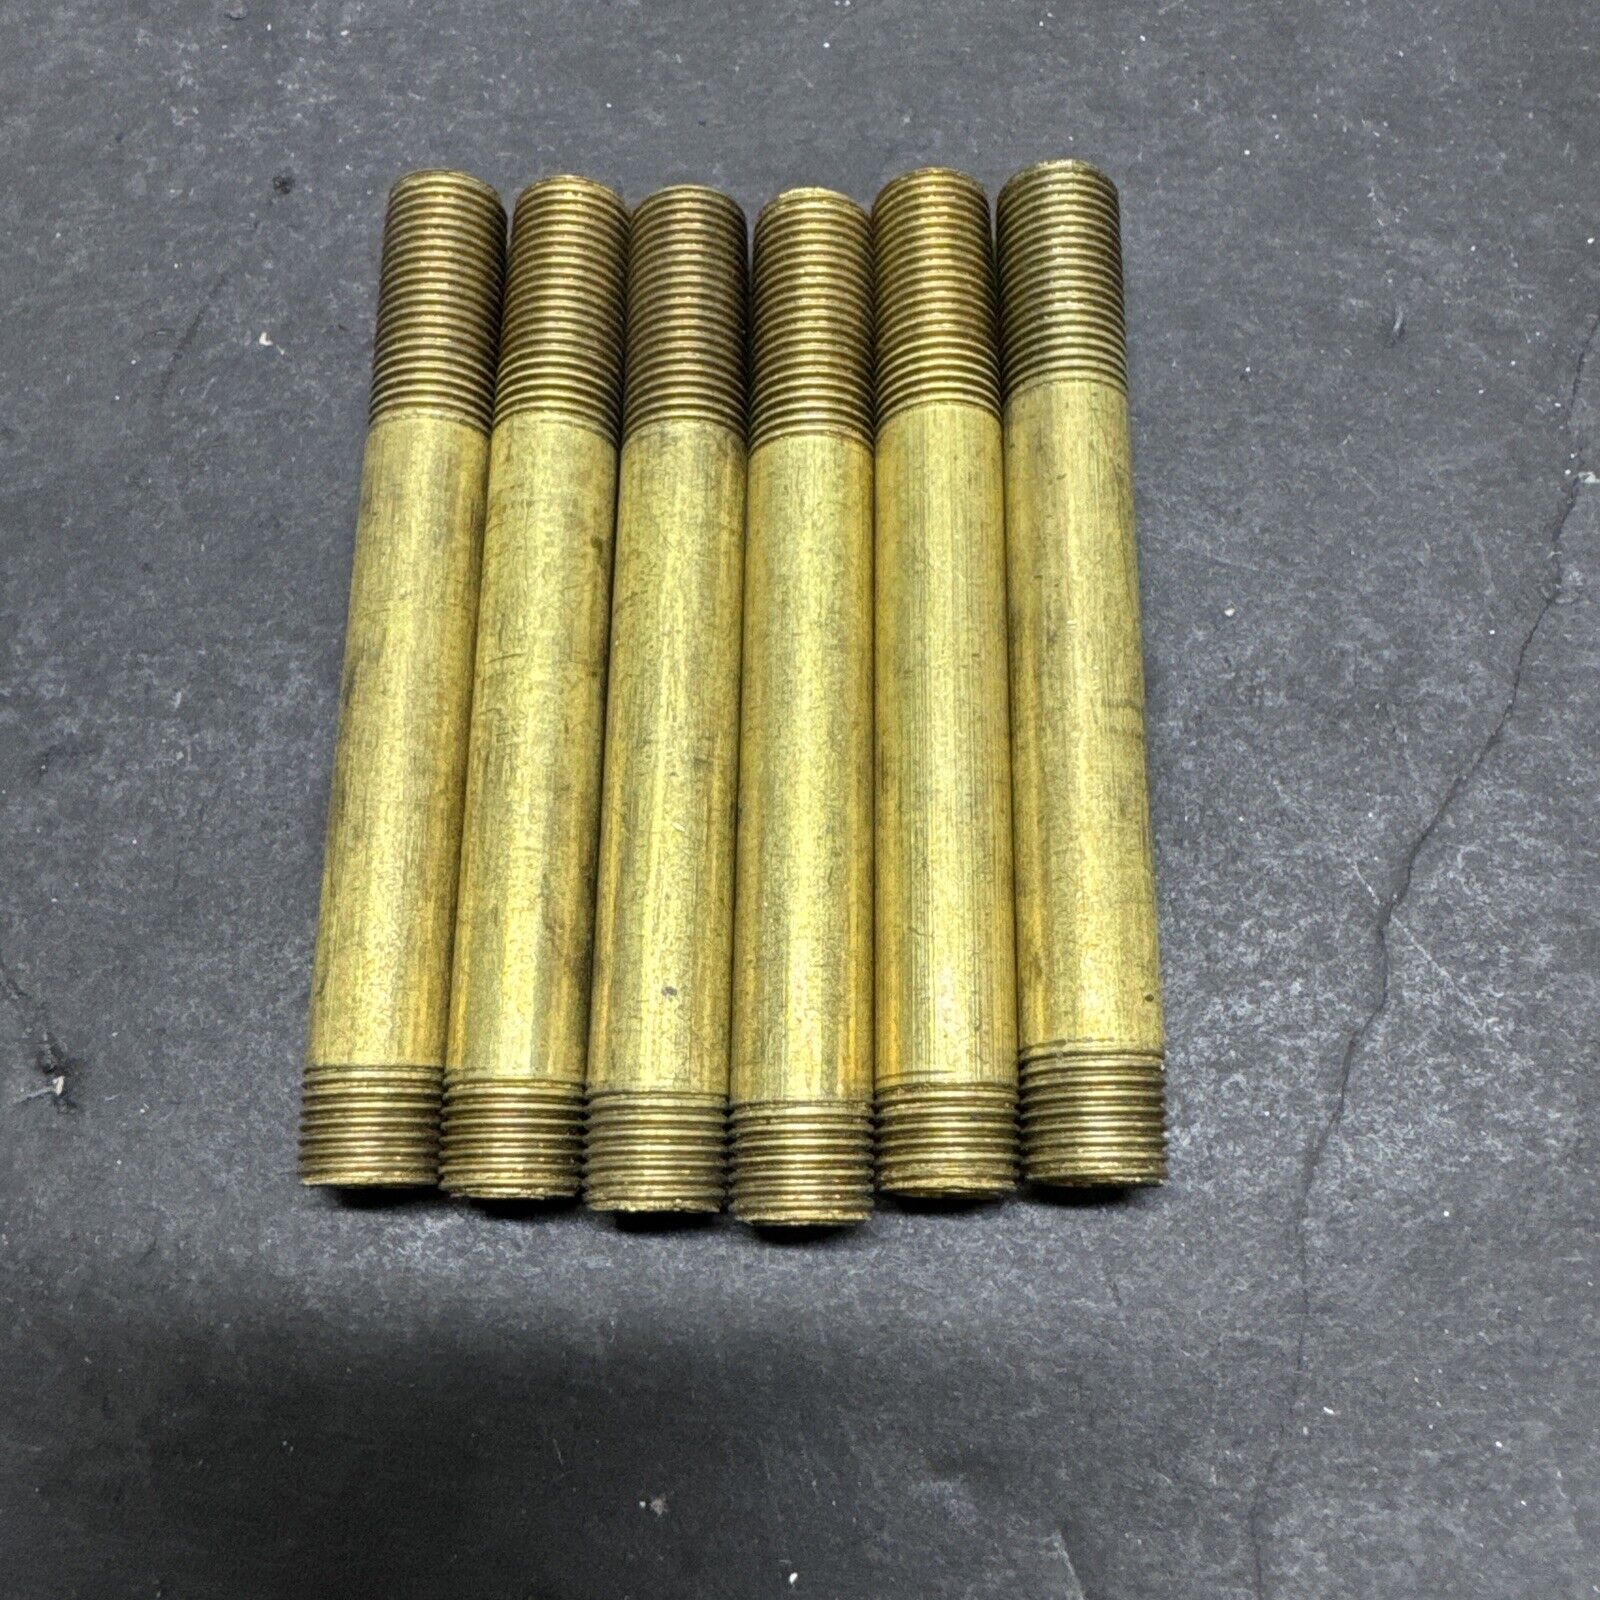 3 “ X 1/8-27 IPS BRASS UNFINISHED 1/4” LONG THREAD - 7/8” LONG ENDS LOT OF 6 PCS